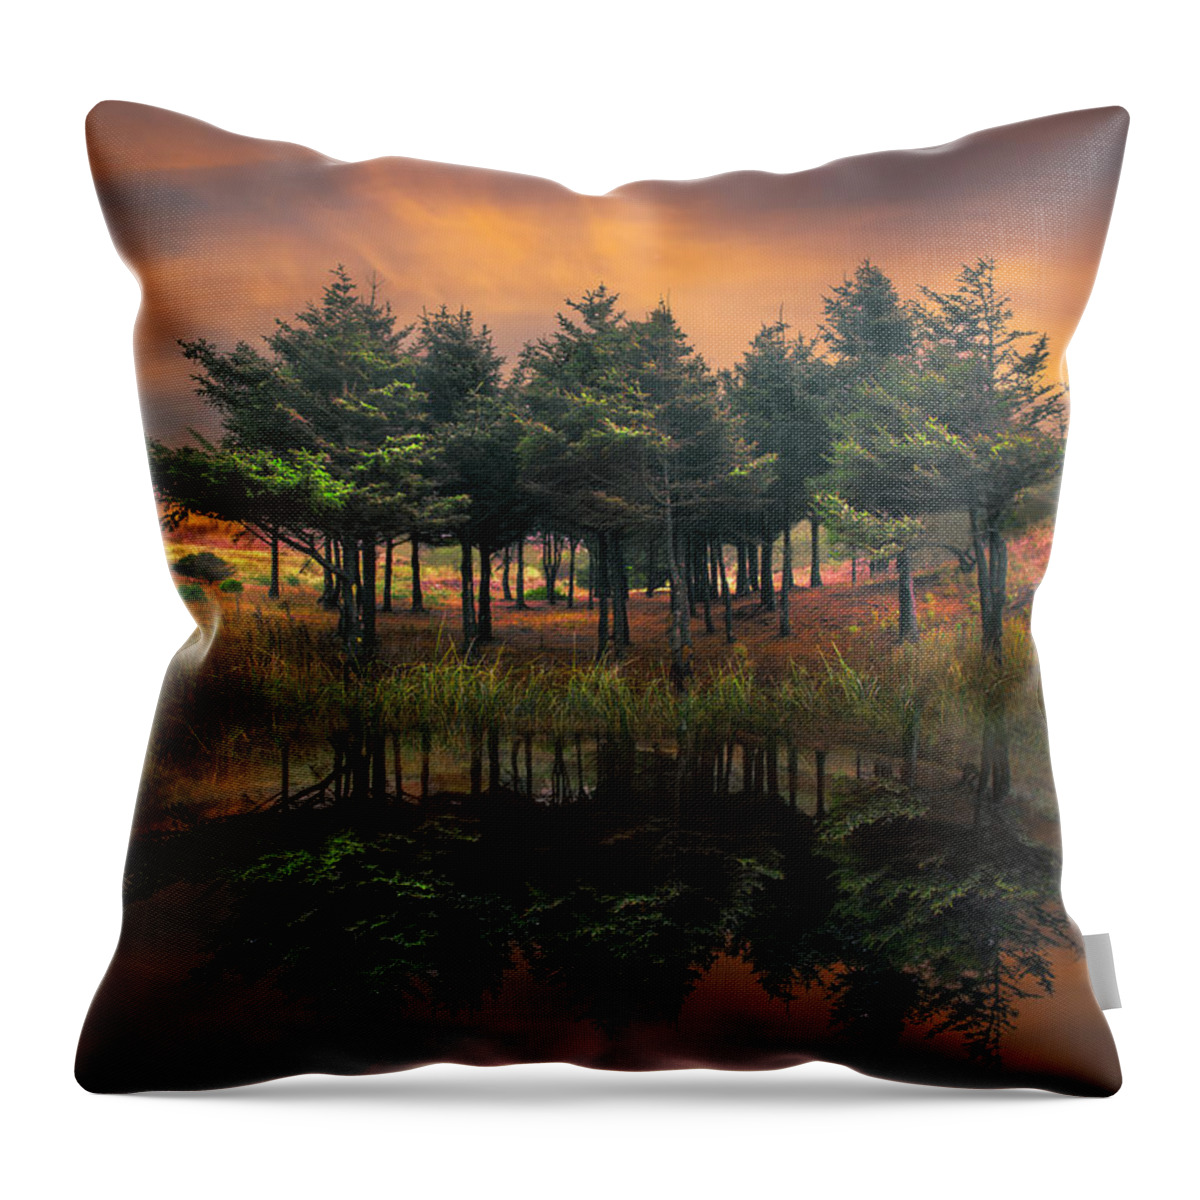 Appalachia Throw Pillow featuring the photograph Fire by Debra and Dave Vanderlaan